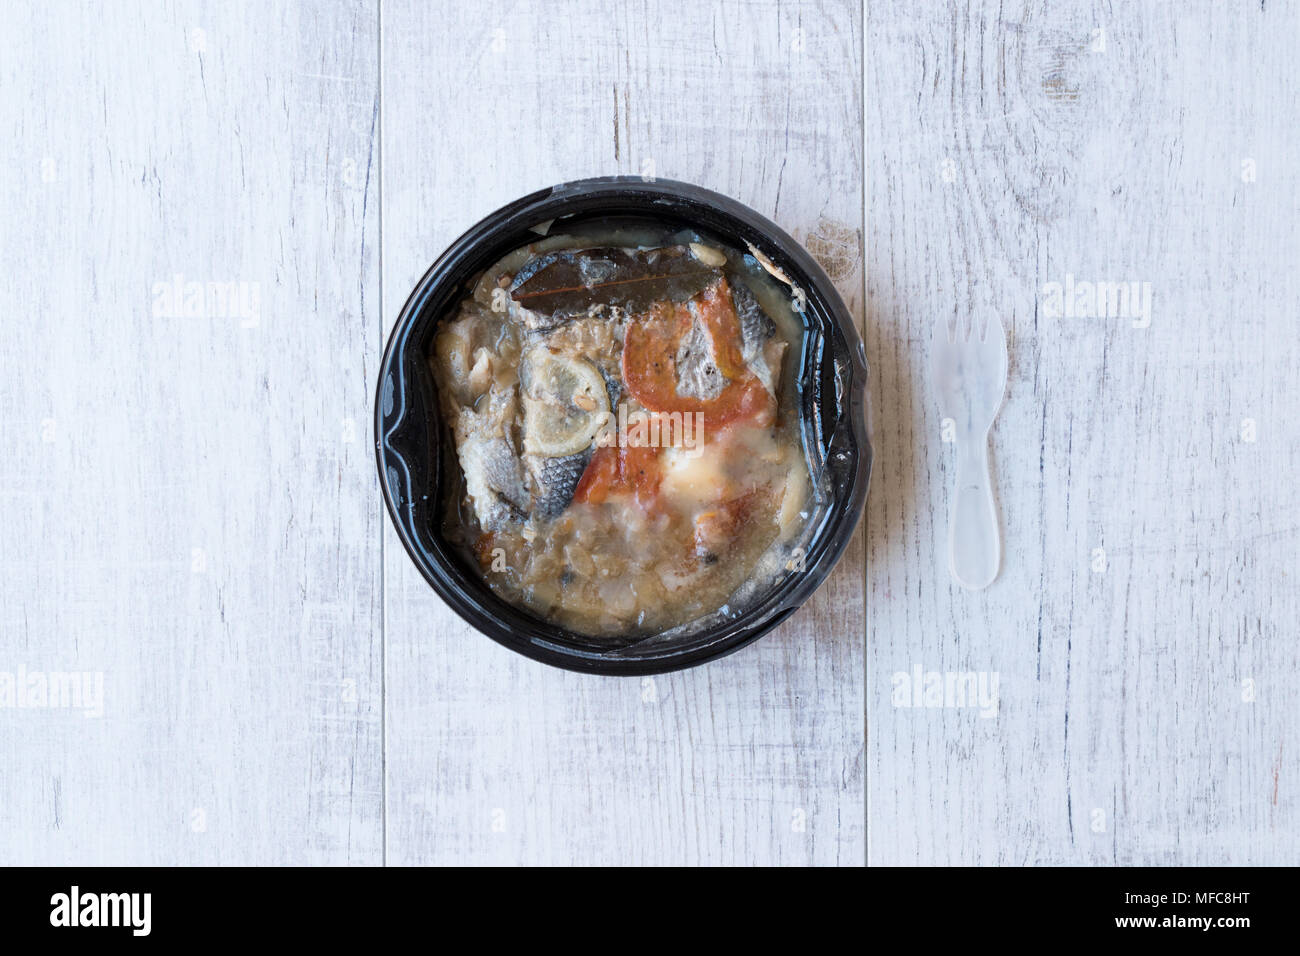 Instand Seafood Gilt-Head Sea Bream Fish in Plastic Container with Fork / Steamed Fish Stew. Organic Food. Stock Photo